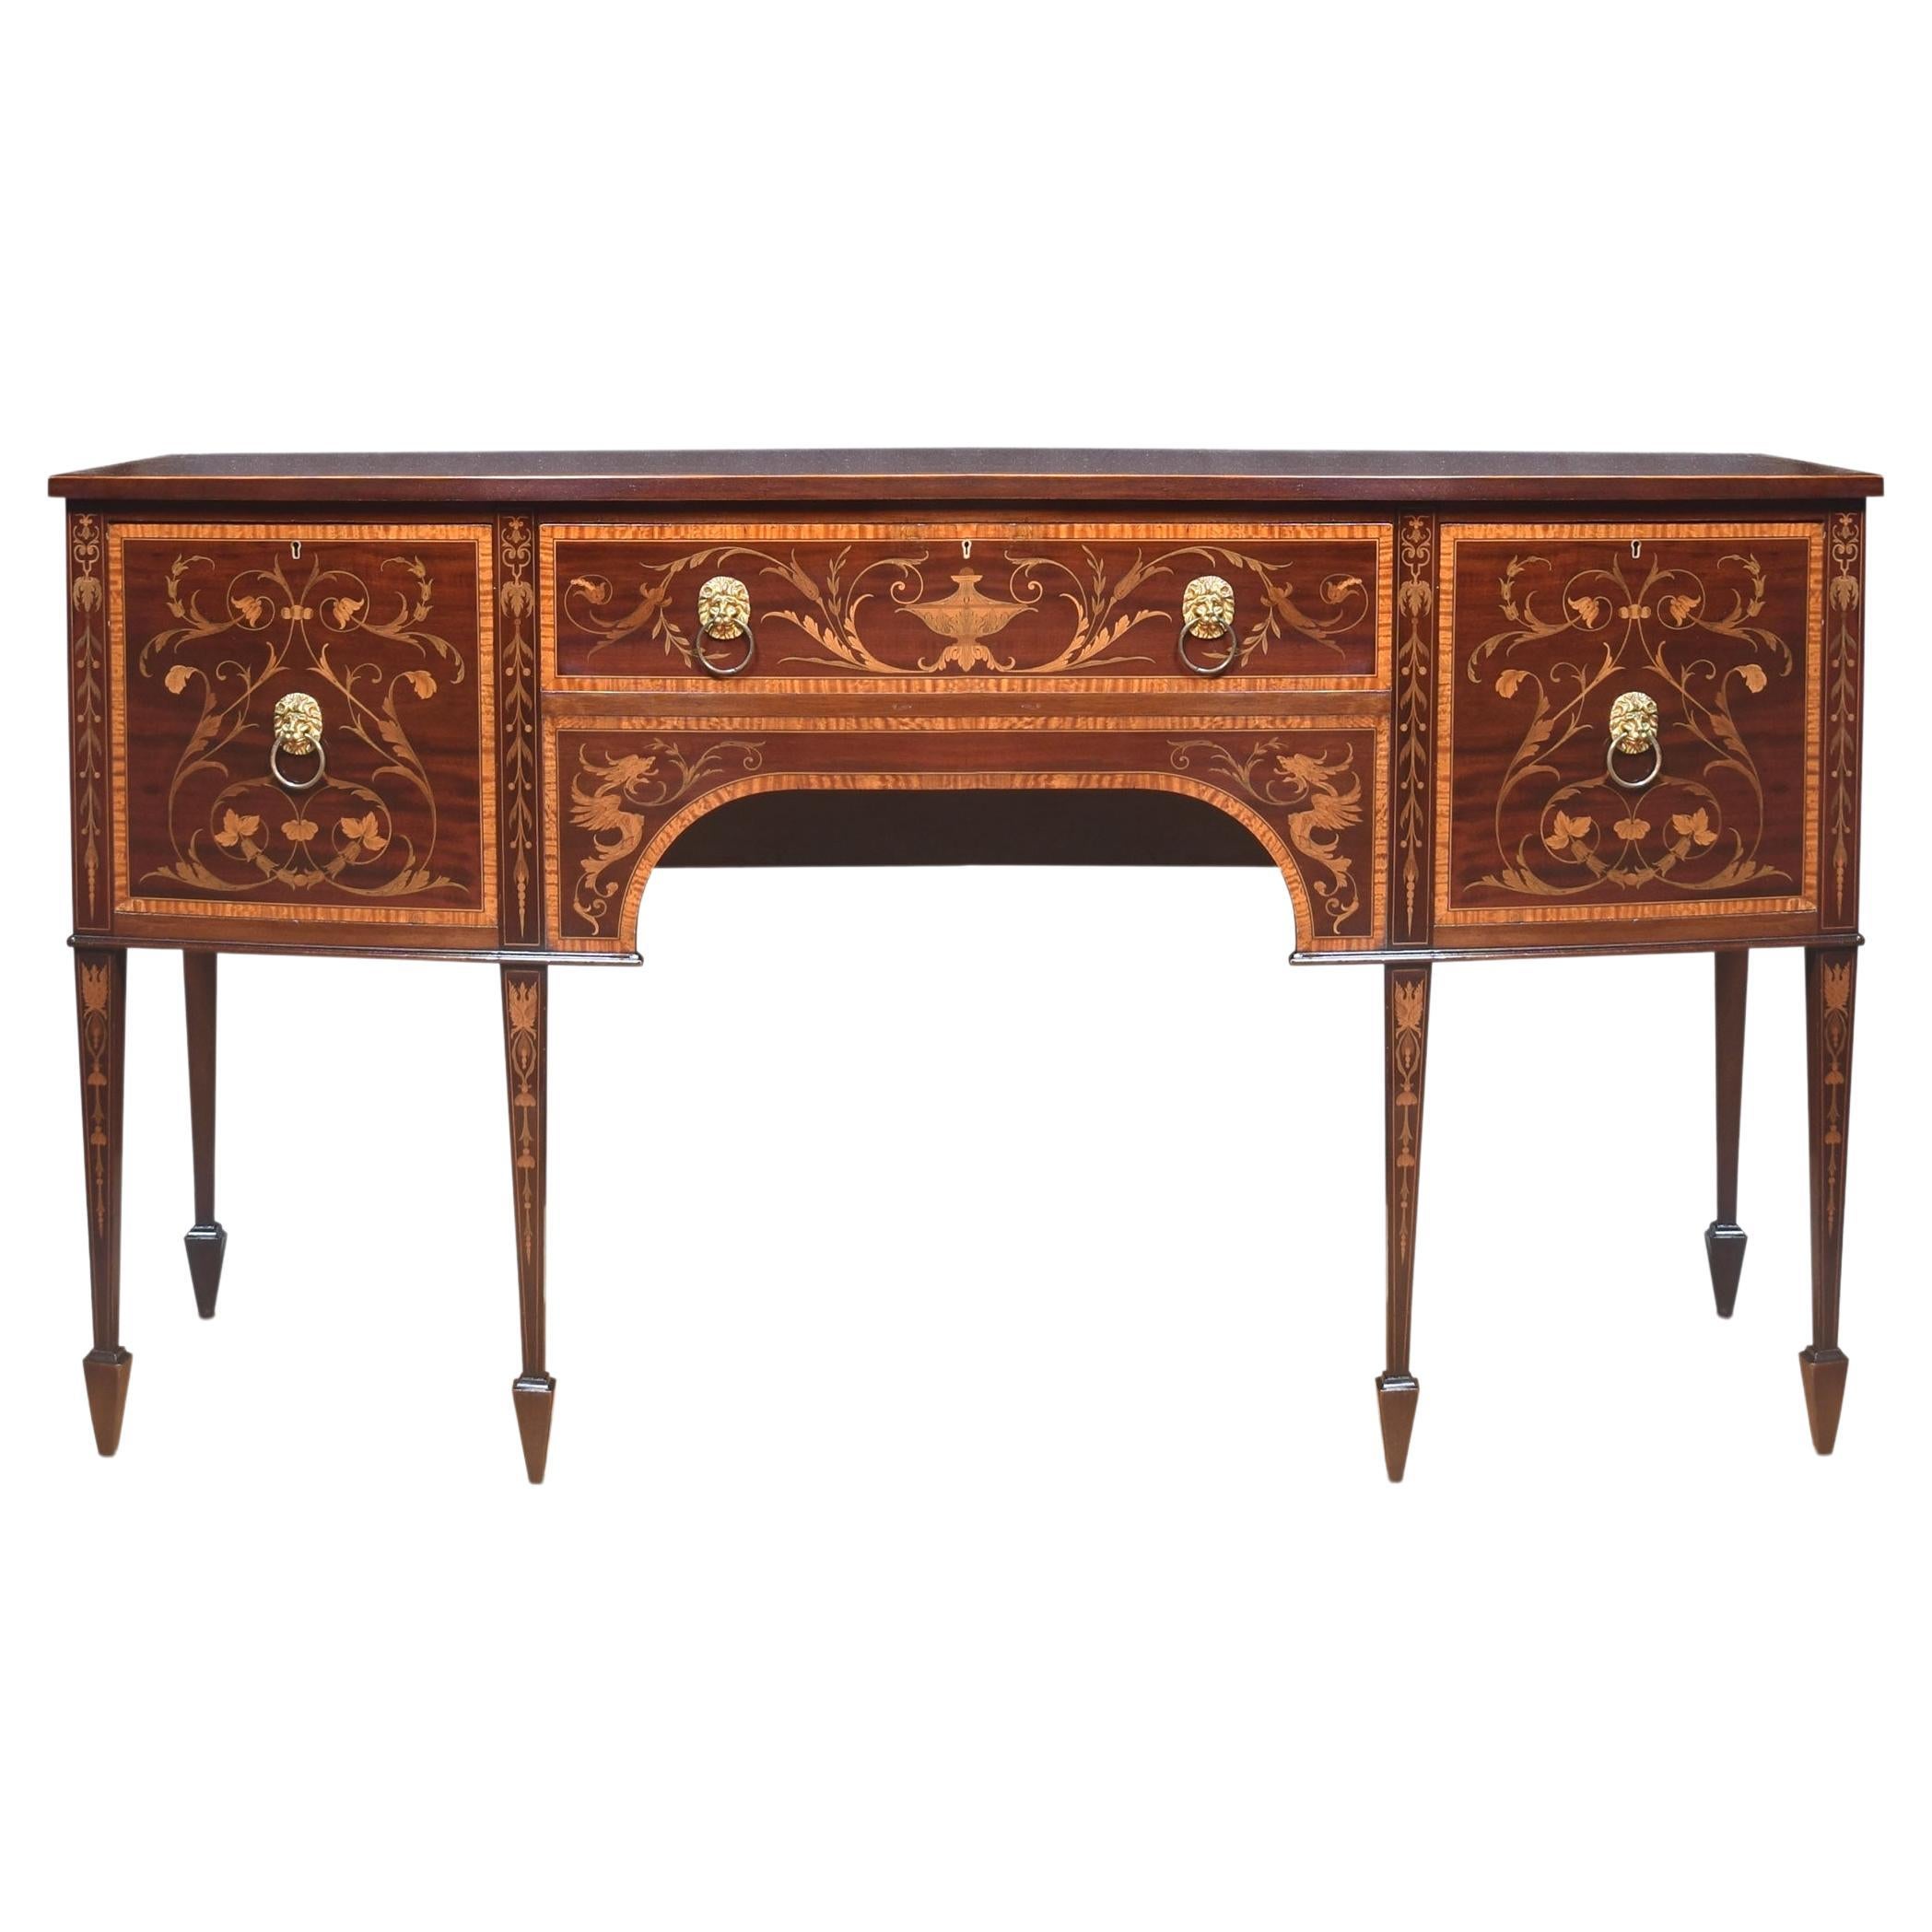 inlaid bow-fronted sideboard